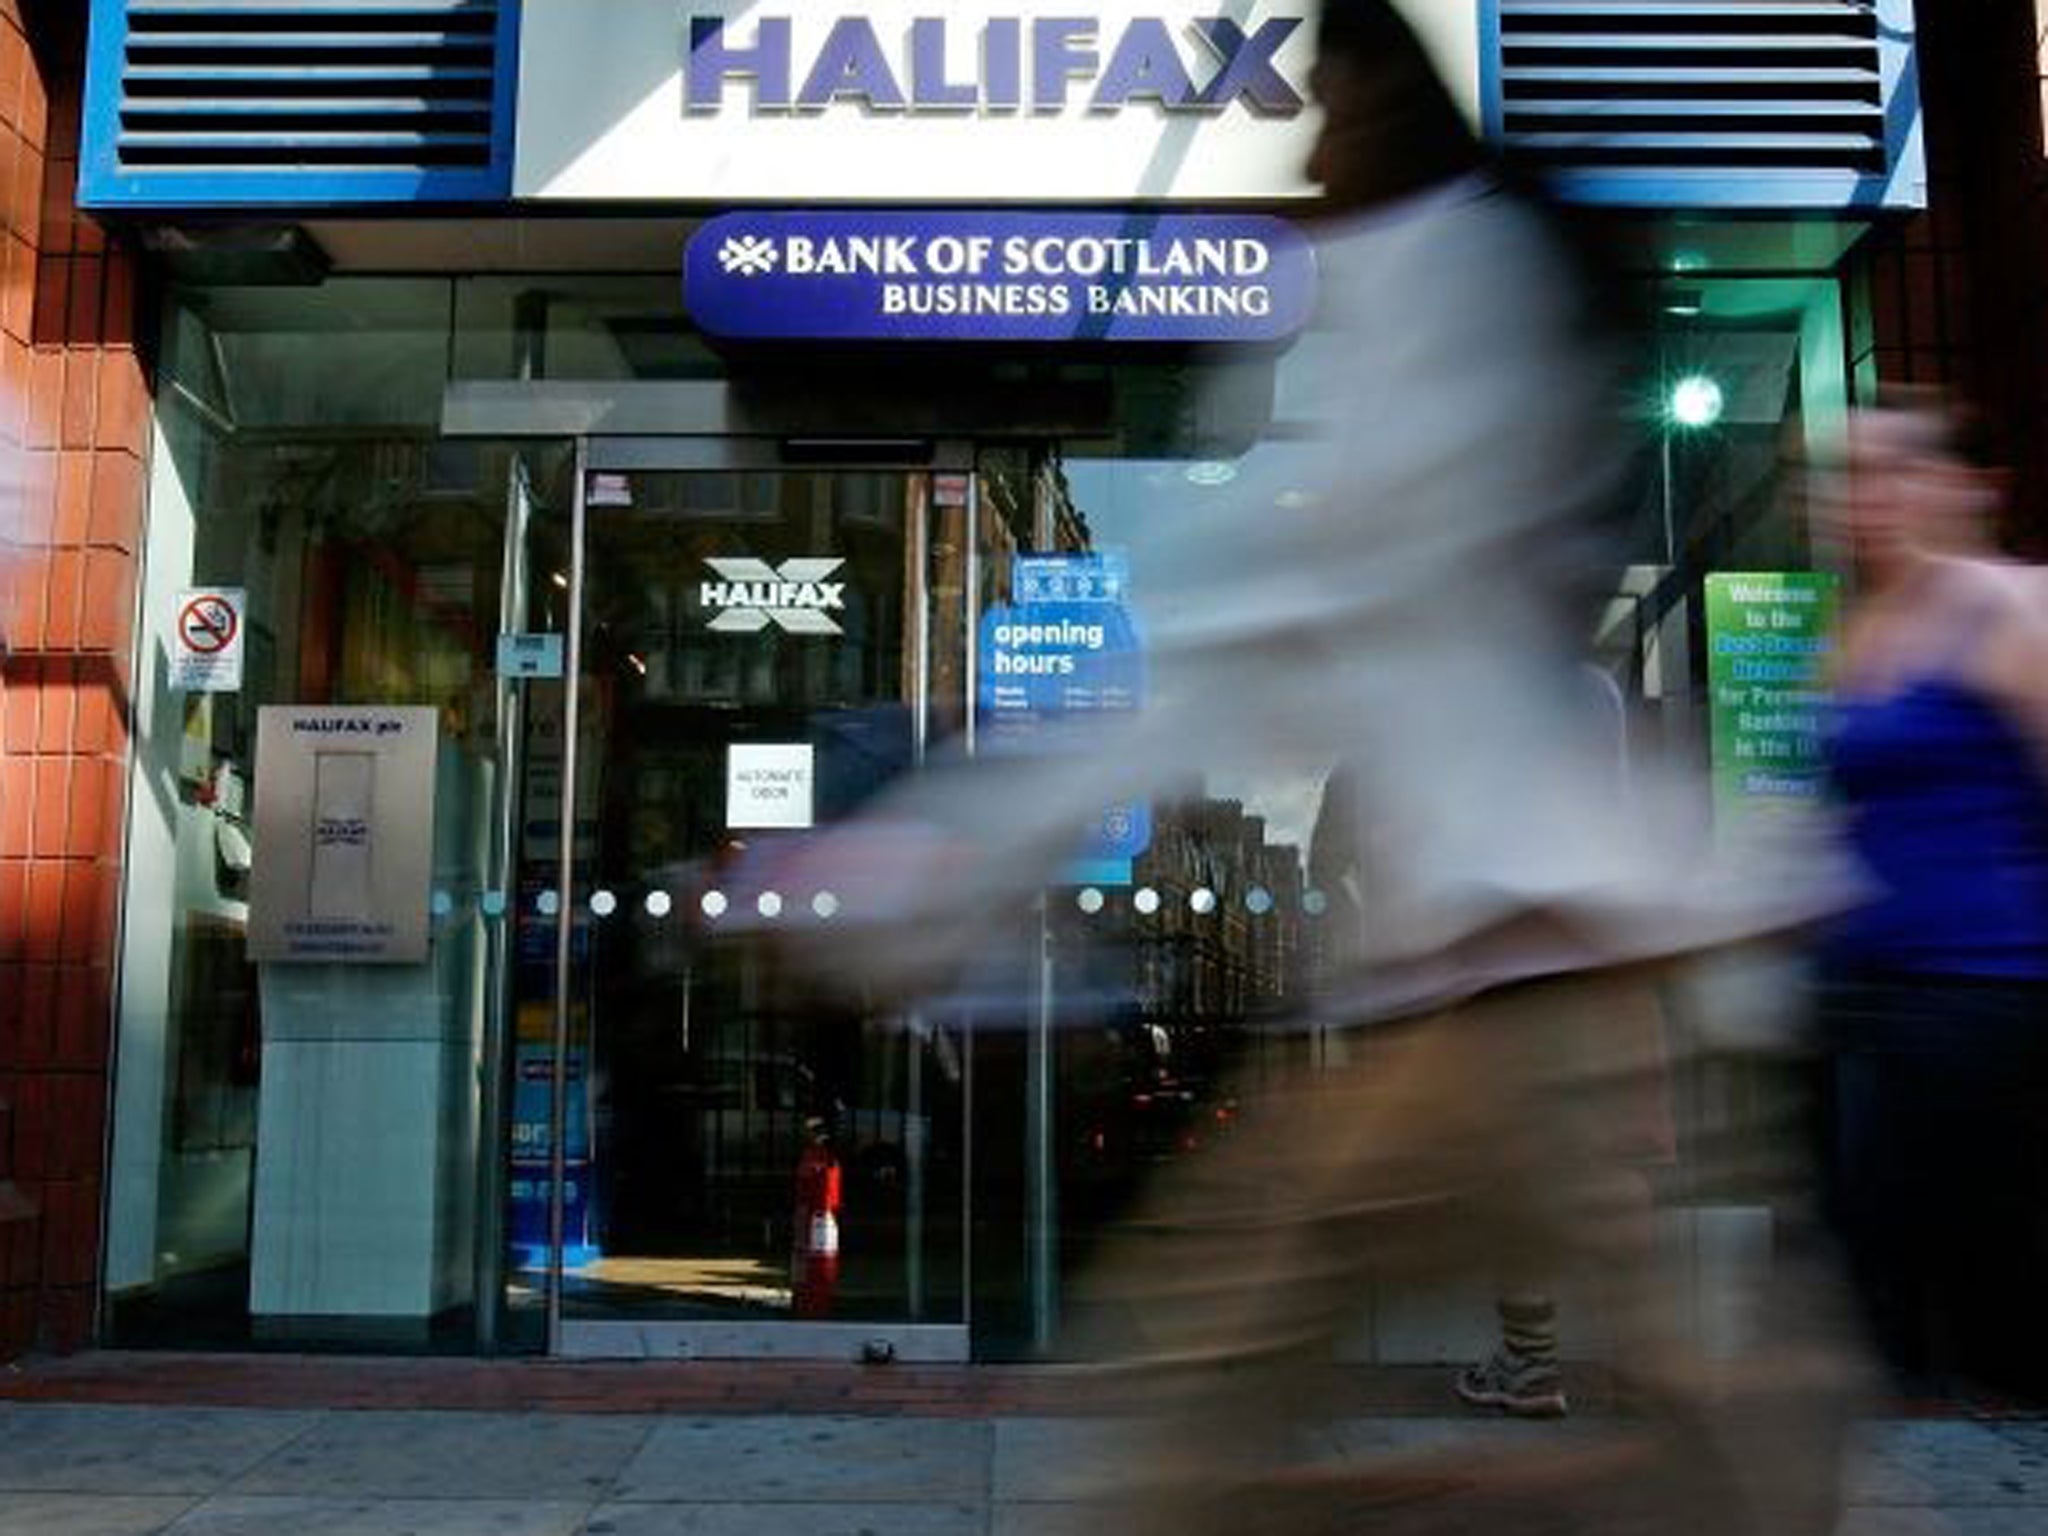 Compensation is an on offer from Halifax if you have been mis-sold payment protection insurance